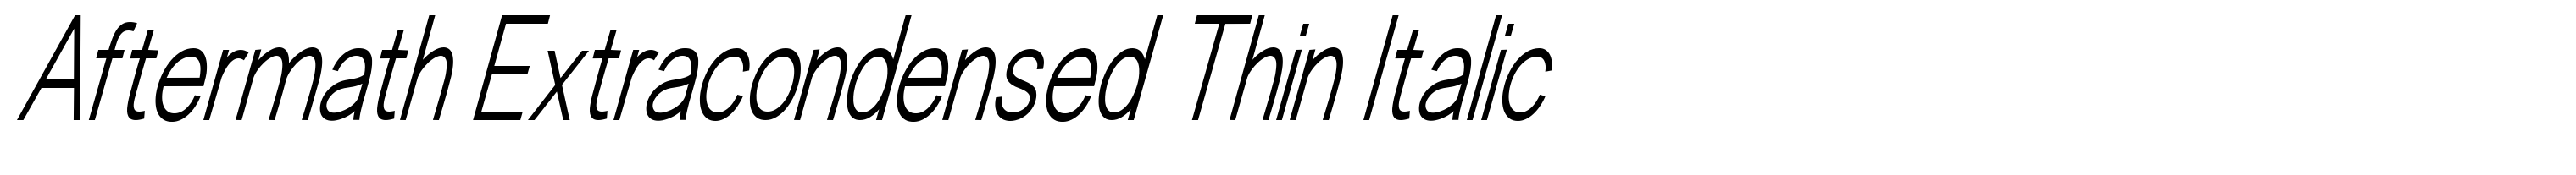 Aftermath Extracondensed Thin Italic